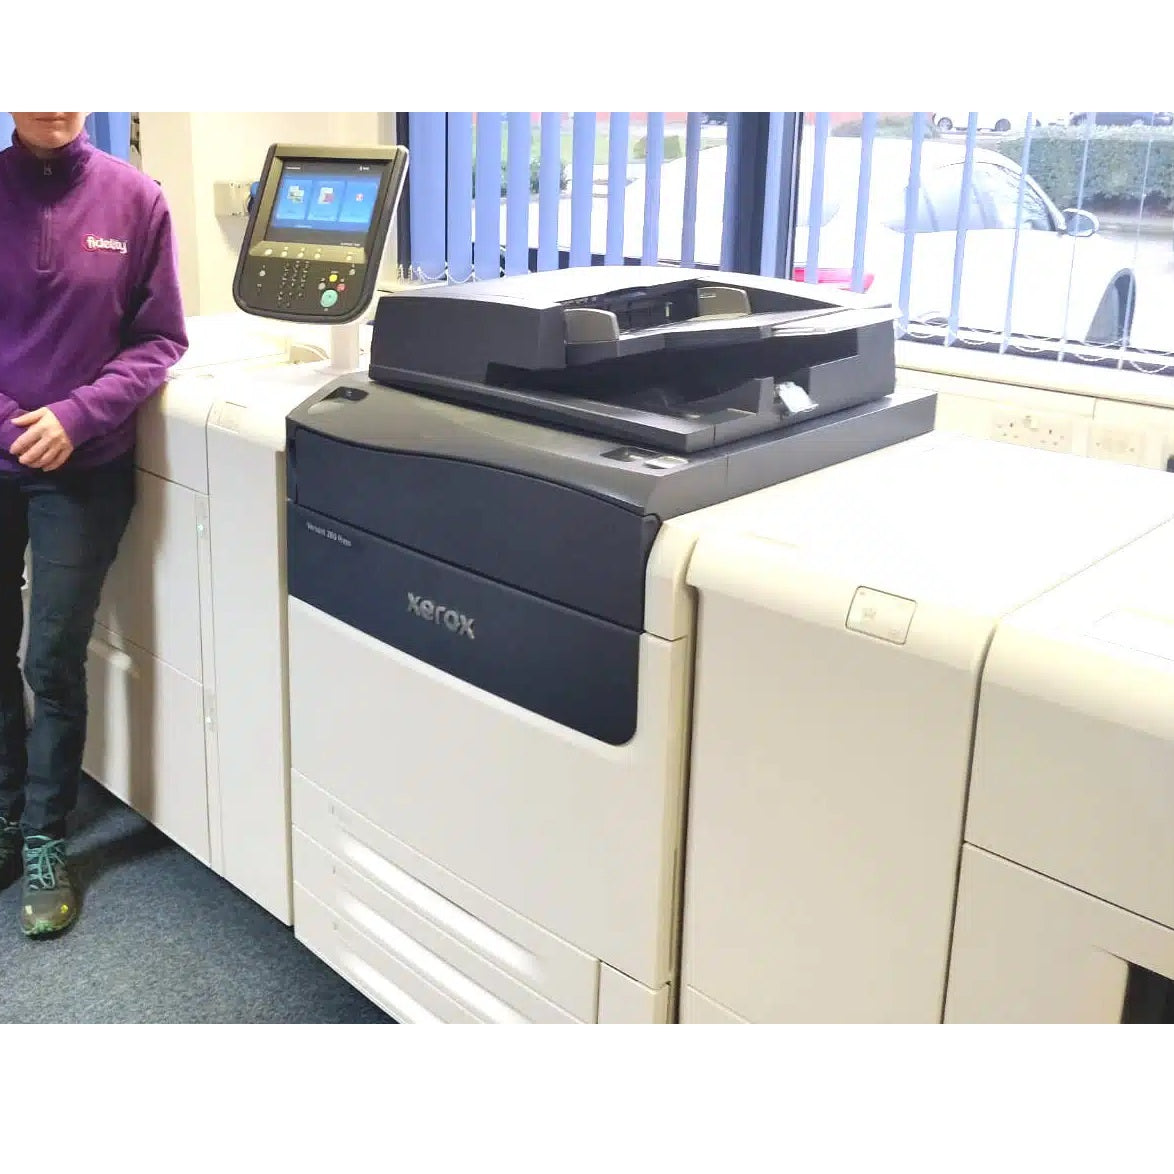 Xerox Versant 280: The High-Quality Printing Solution for Your Business